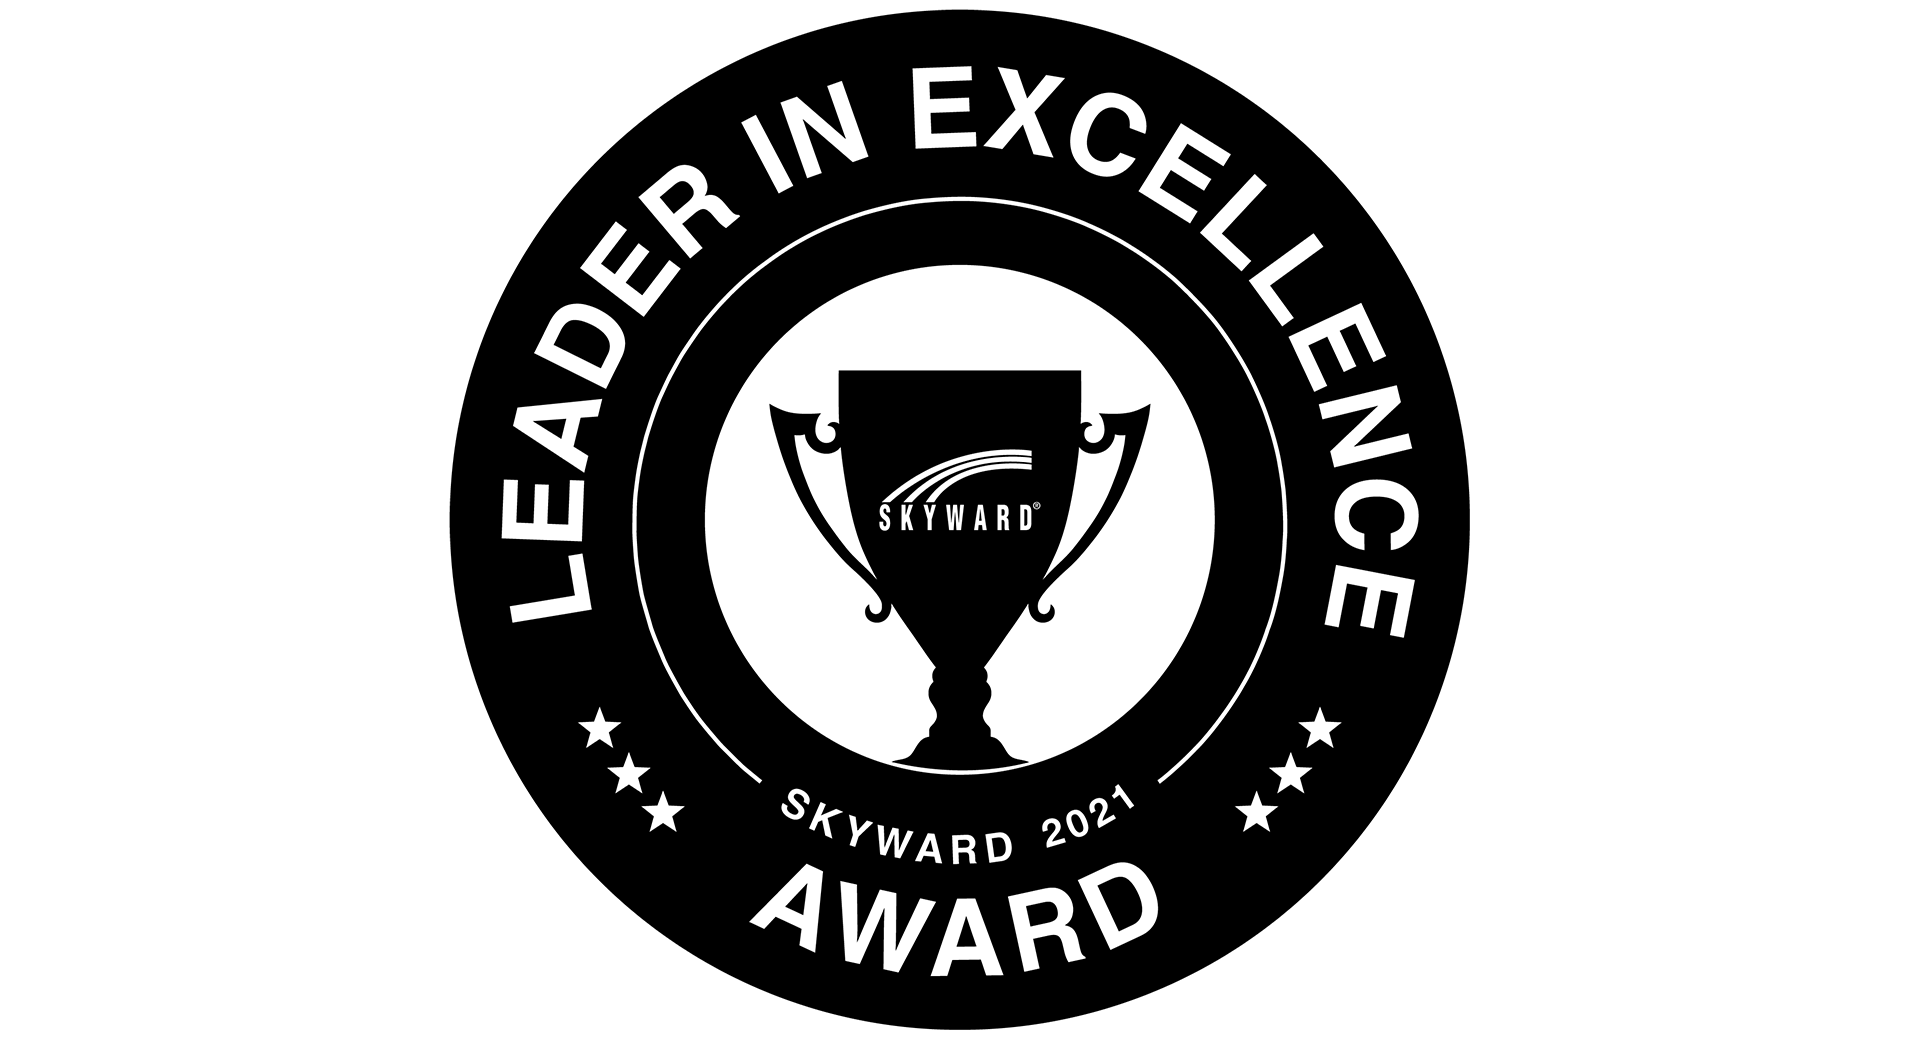 Calling All Leaders in Excellence!